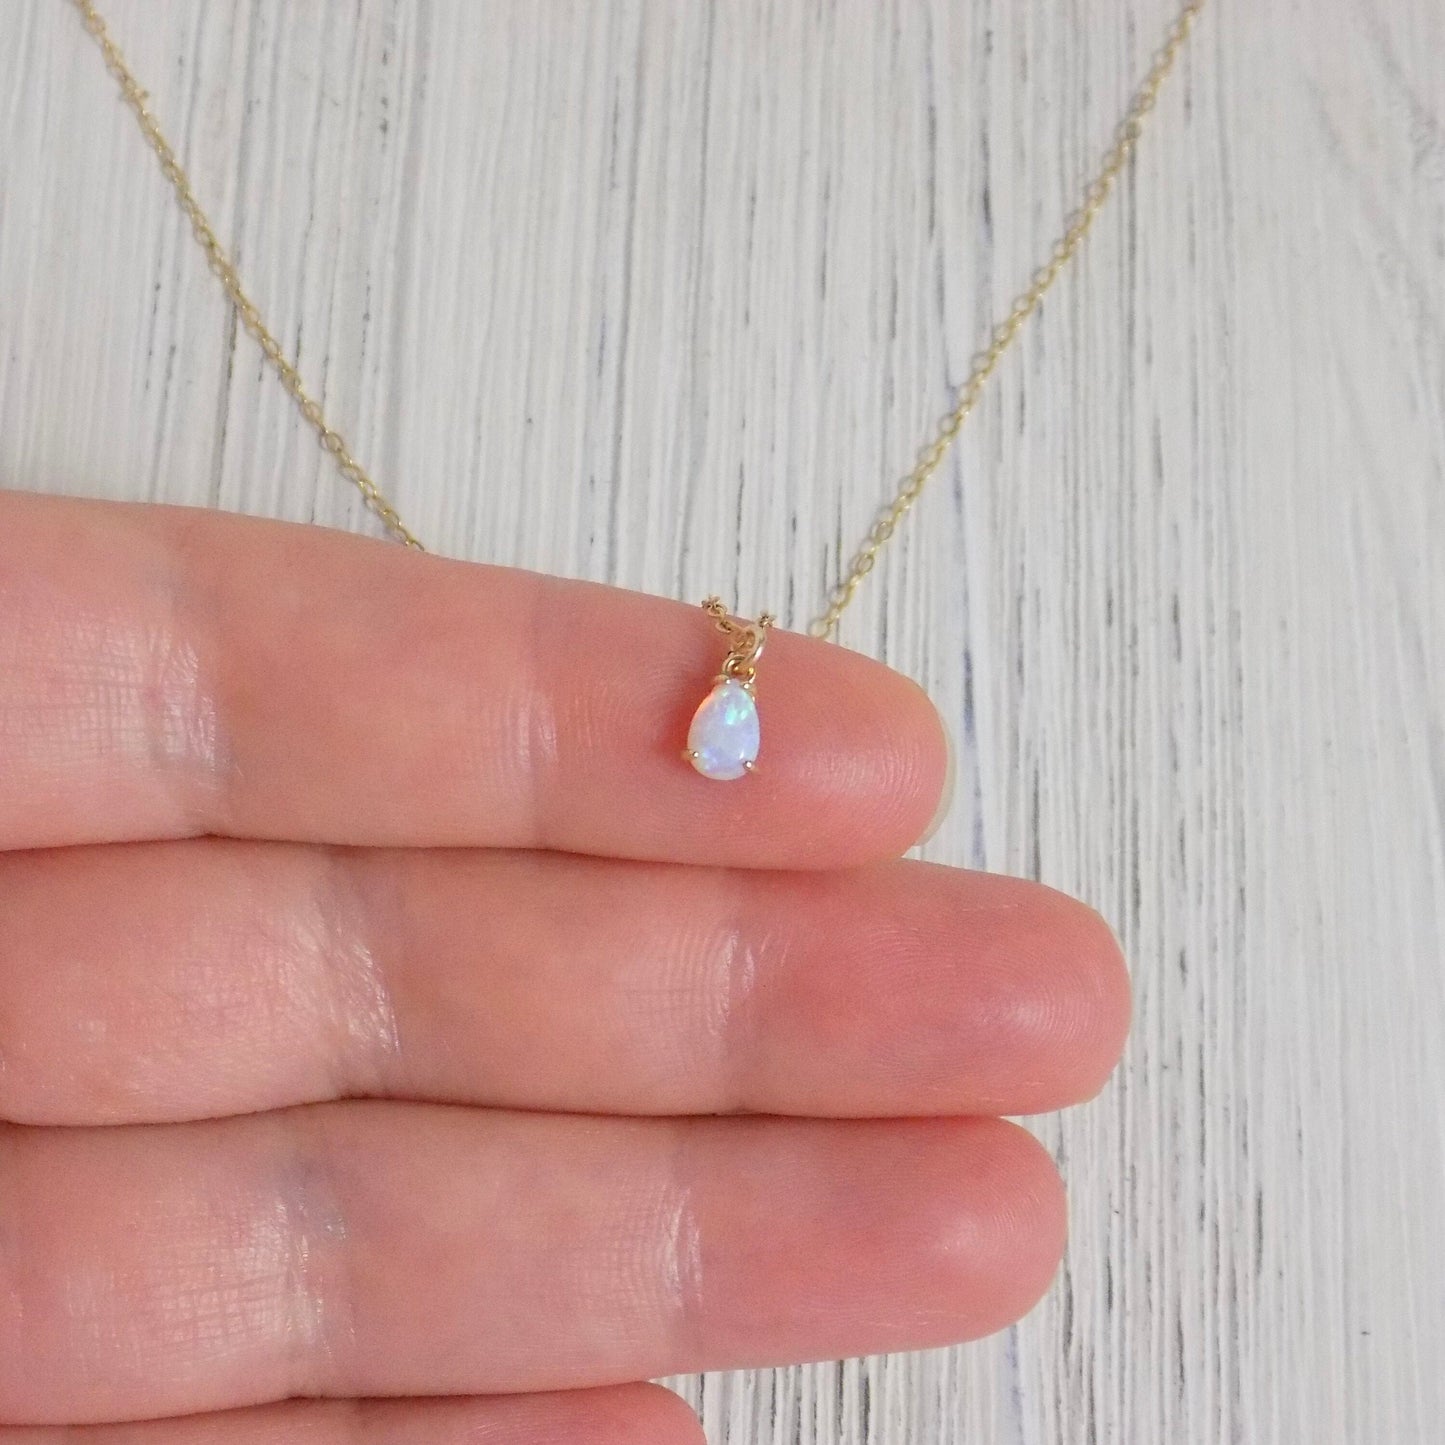 Mothers Day Gift, Tiny Opal Necklace Gold, 14K Gold Filled Chain, Teardrop Opal Charm Necklaces, L4-52